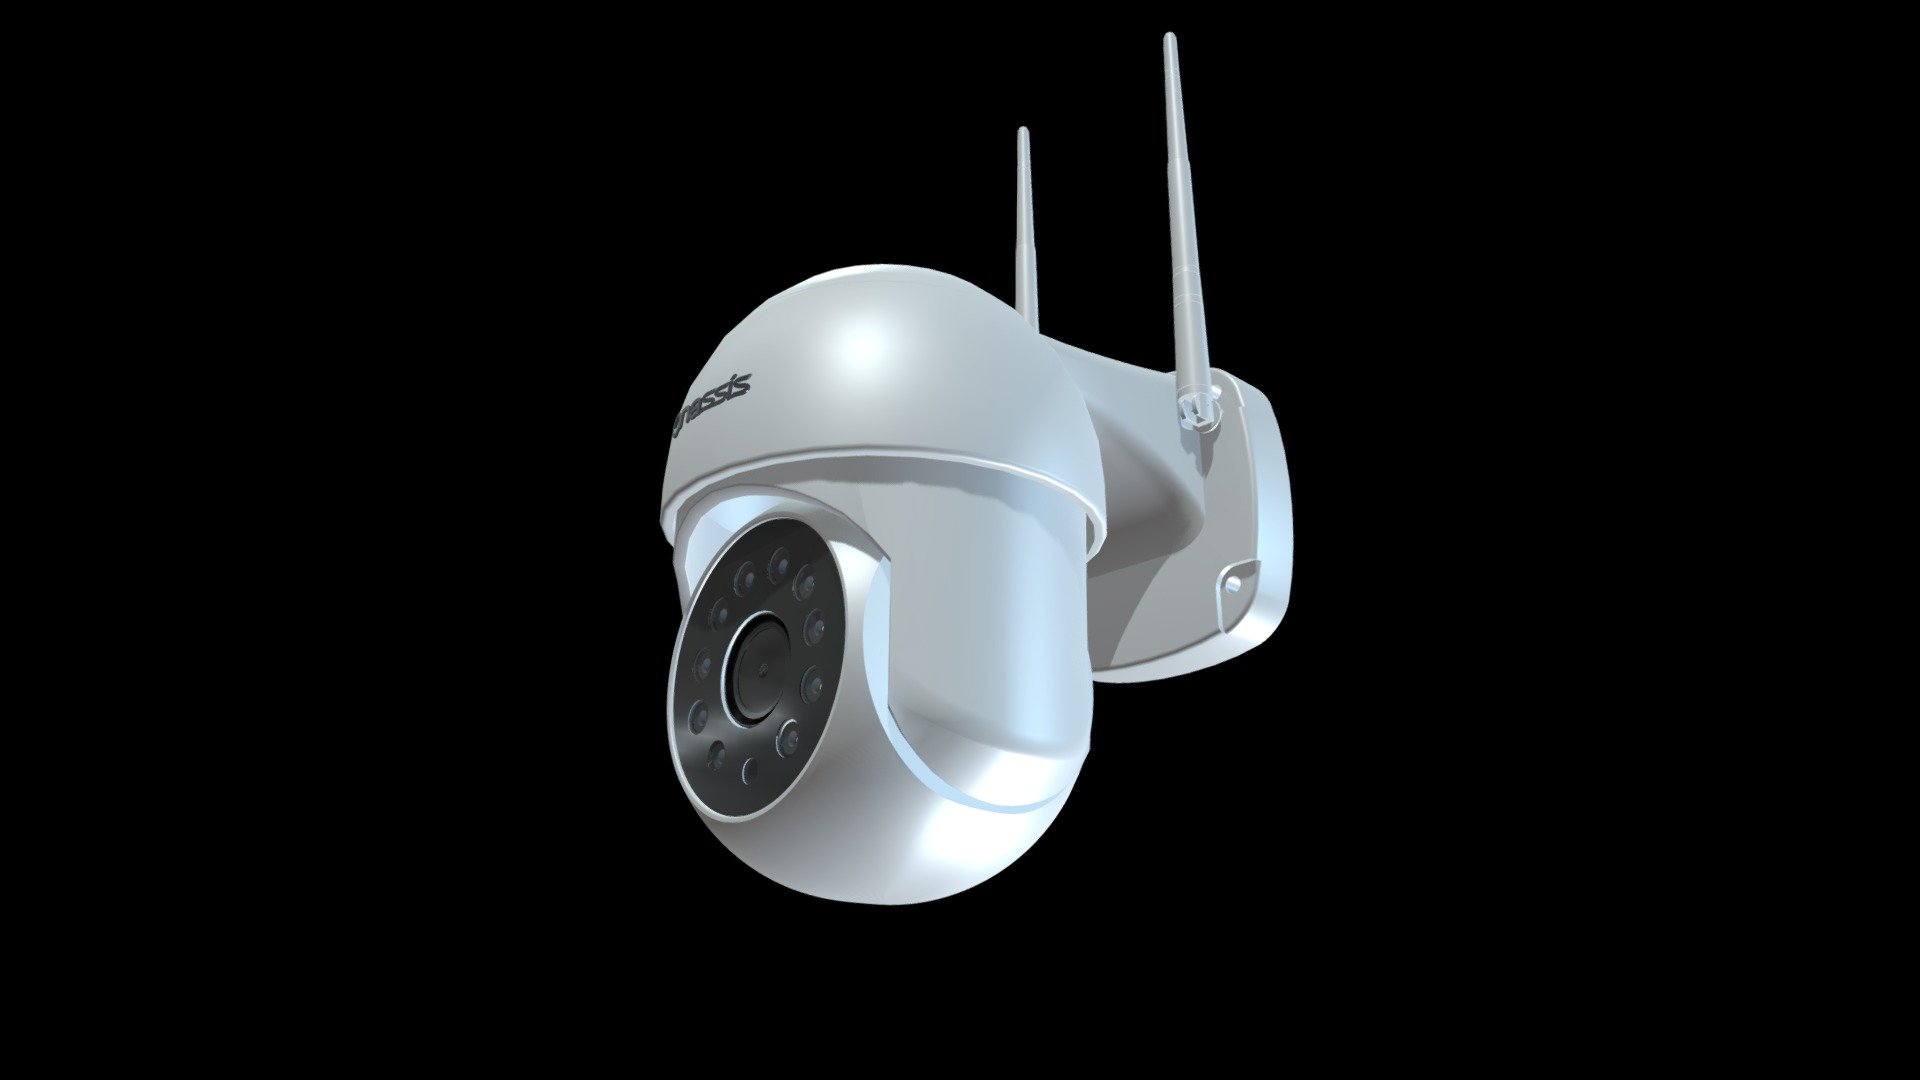 A state-of-the-art smart home security camera with night vision and a 360 degree rotatable camera. With support for external memory cards up to 124GB, you can record your footage in HD and immediately check the footage when needed. This device is easy to set up, you can access it through your smartphone and most importantly, is discreet looking enough to be placed anywhere without being an eye sore or attracting attention from intruders - Smart Cctv Outdoor - 3D model by Muhammad.Al.Fariki 3d model